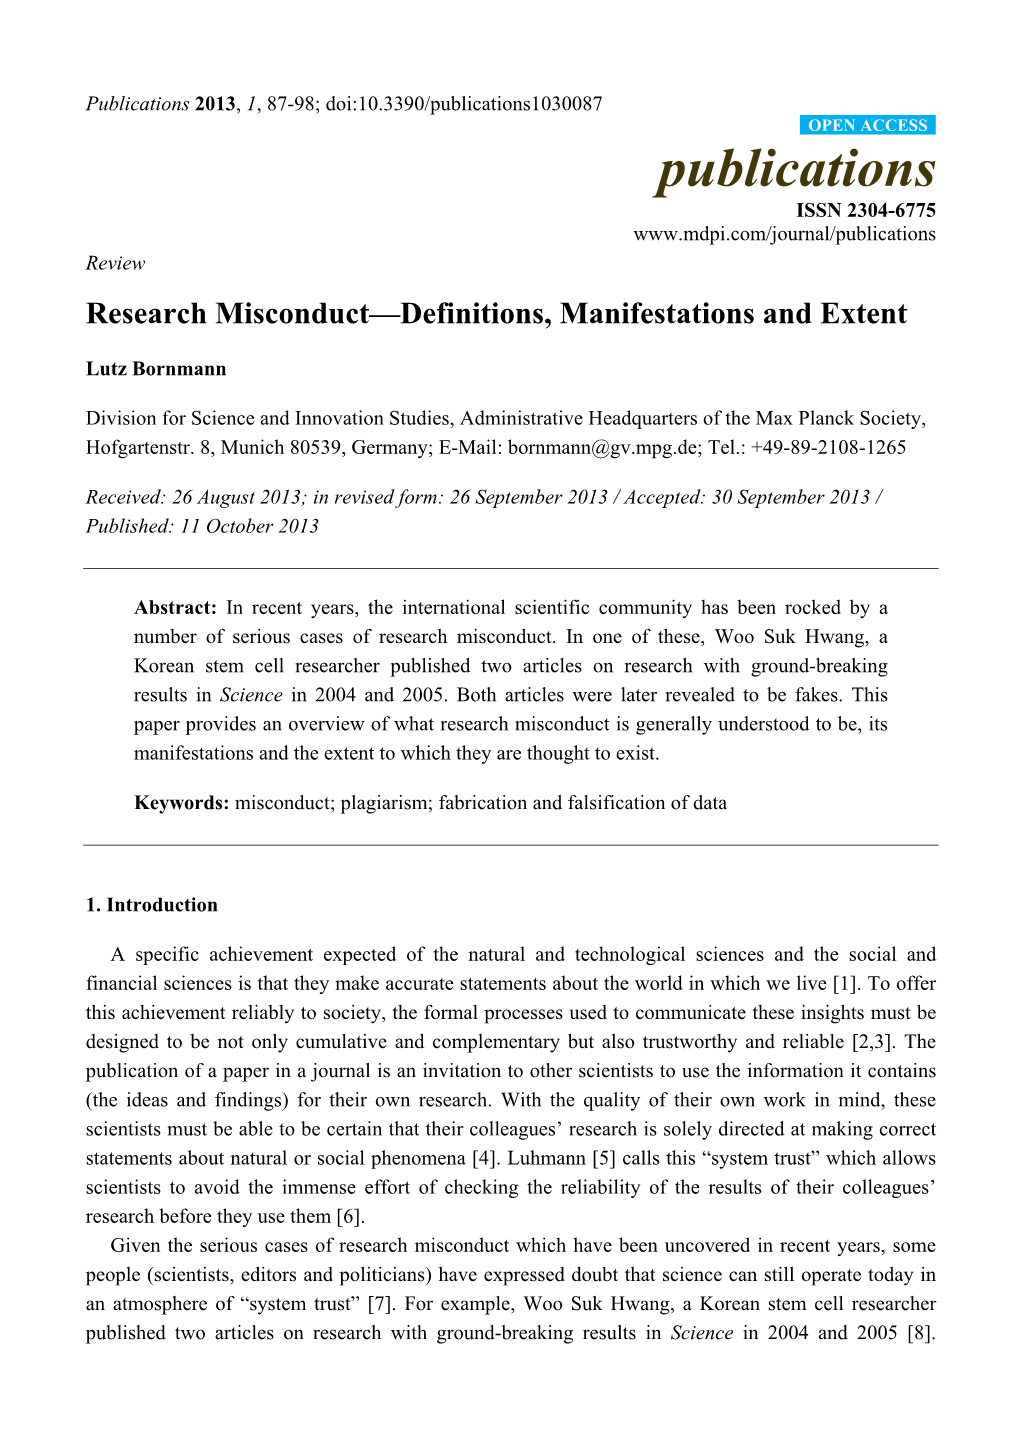 Research Misconduct—Definitions, Manifestations and Extent